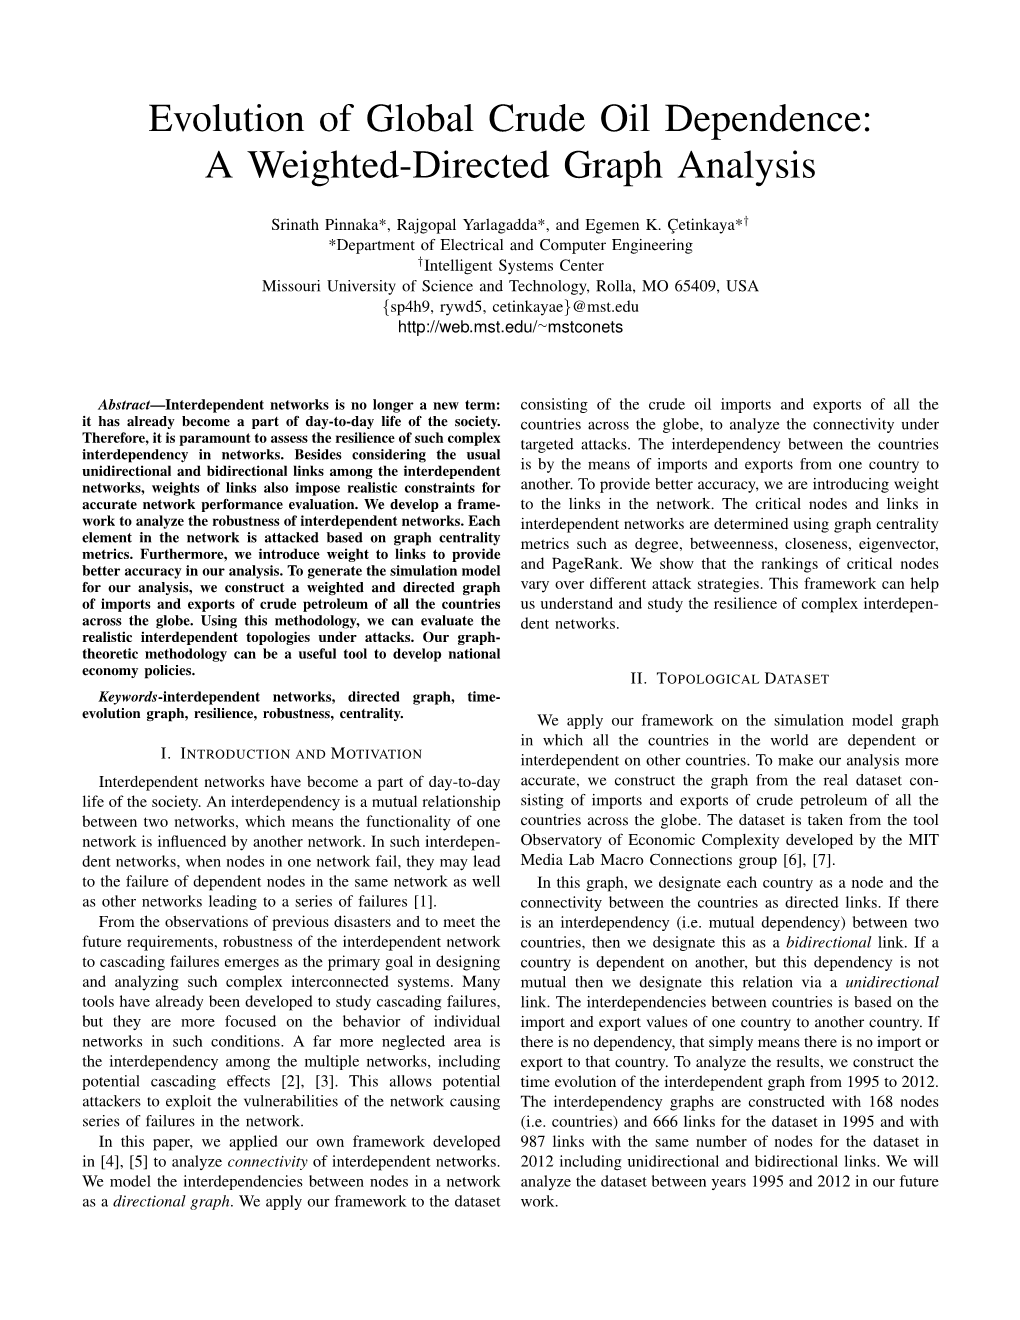 A Weighted-Directed Graph Analysis